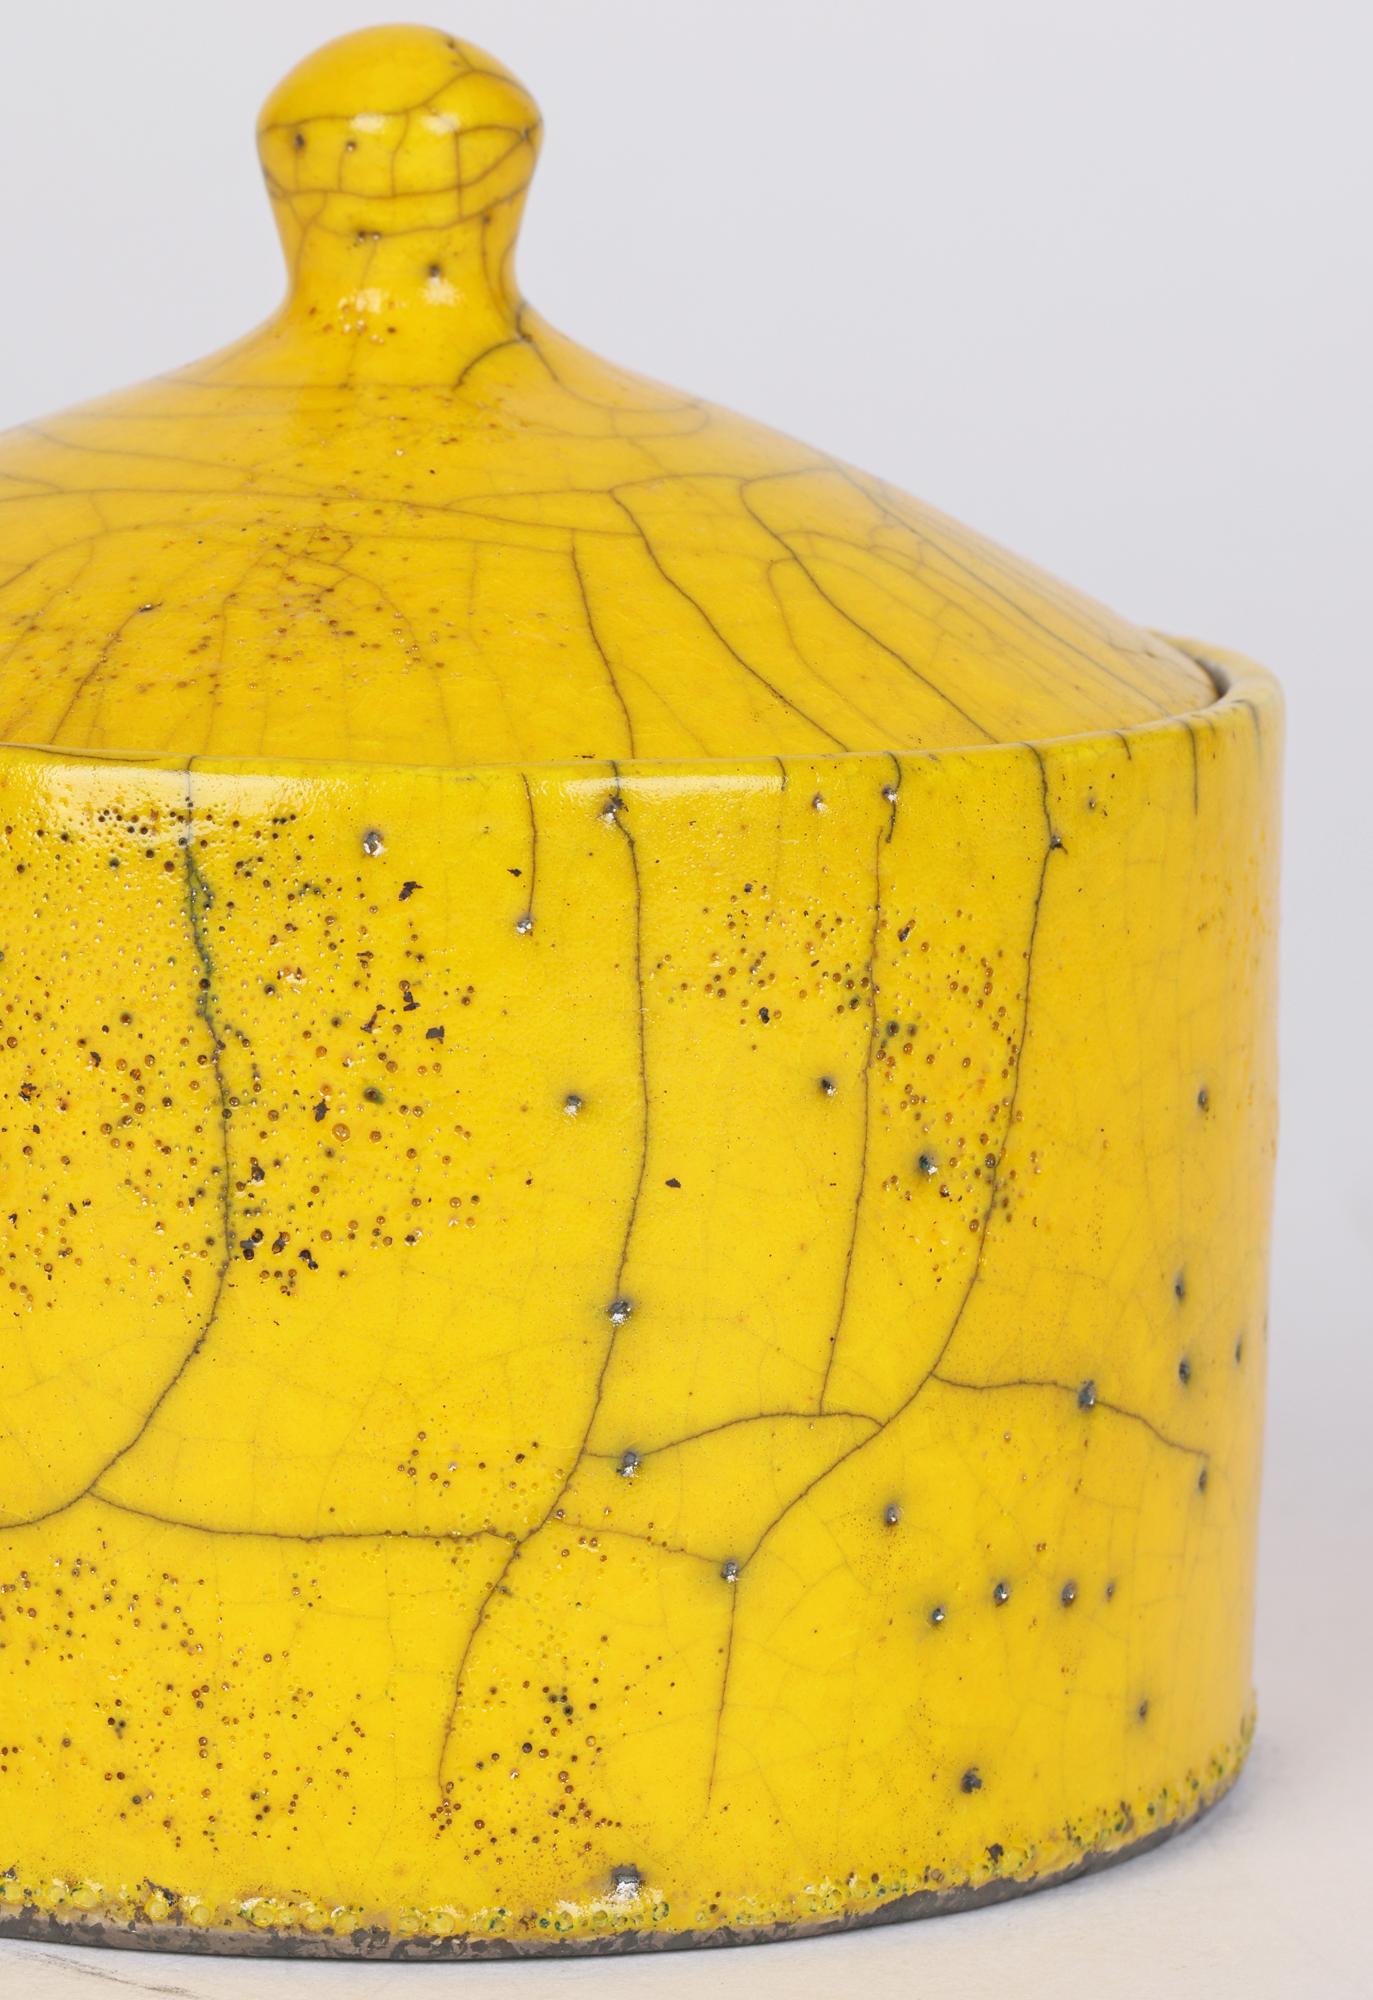 A very finely made British studio pottery lidded pot decorated with yellow raku fired glazes by Rob Hand (British, b.1948) and dating from the latter 20th or early 21st century. The pot has a round cylindrical shaped body with a flat base with a